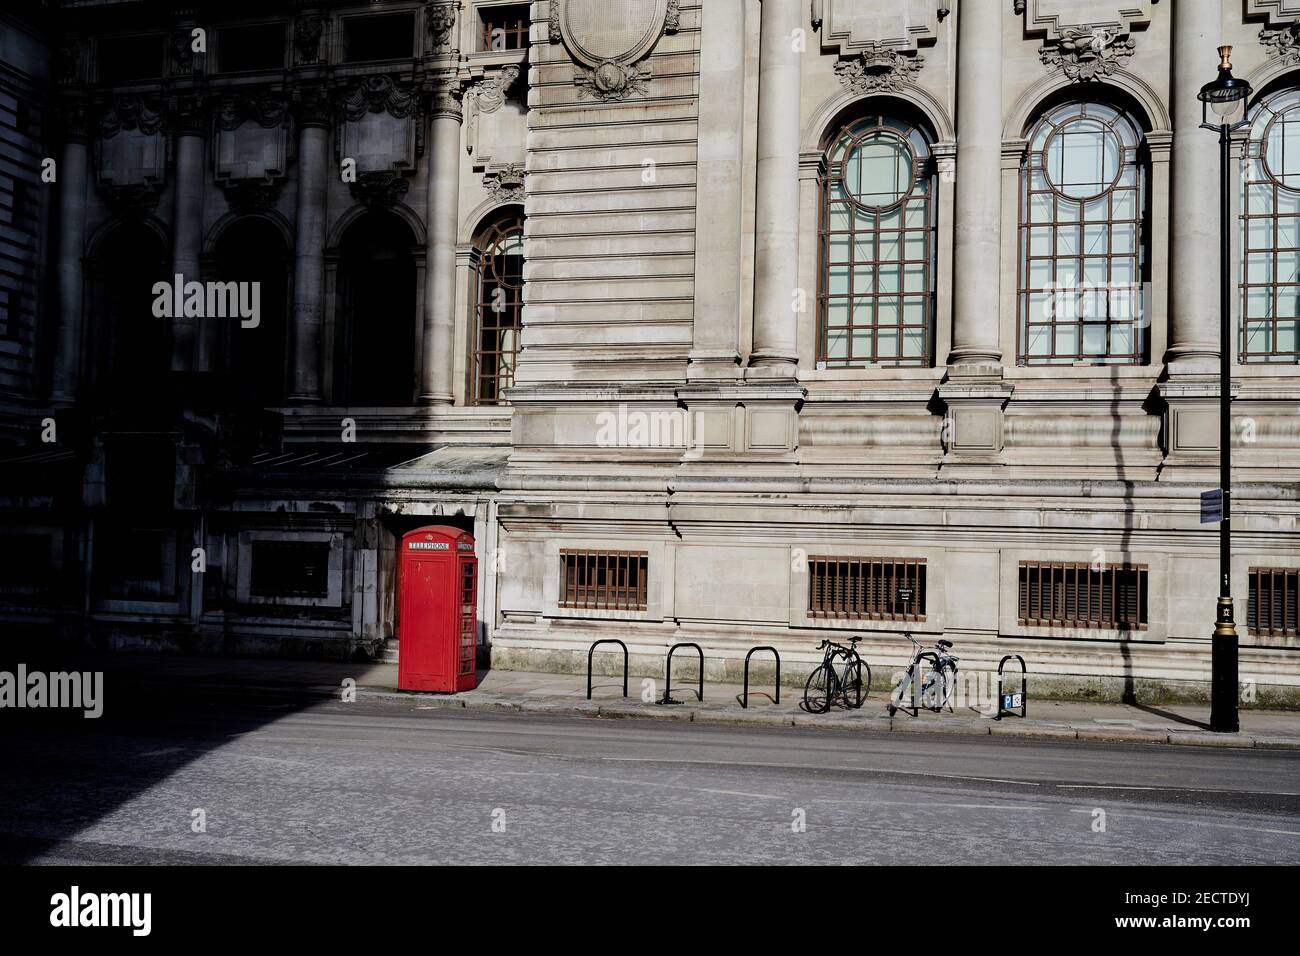 London UK - 13 Feb 2021: Empty london street scene with red telephone box and longs shadows in winter sun in front of old 19th century building Stock Photo